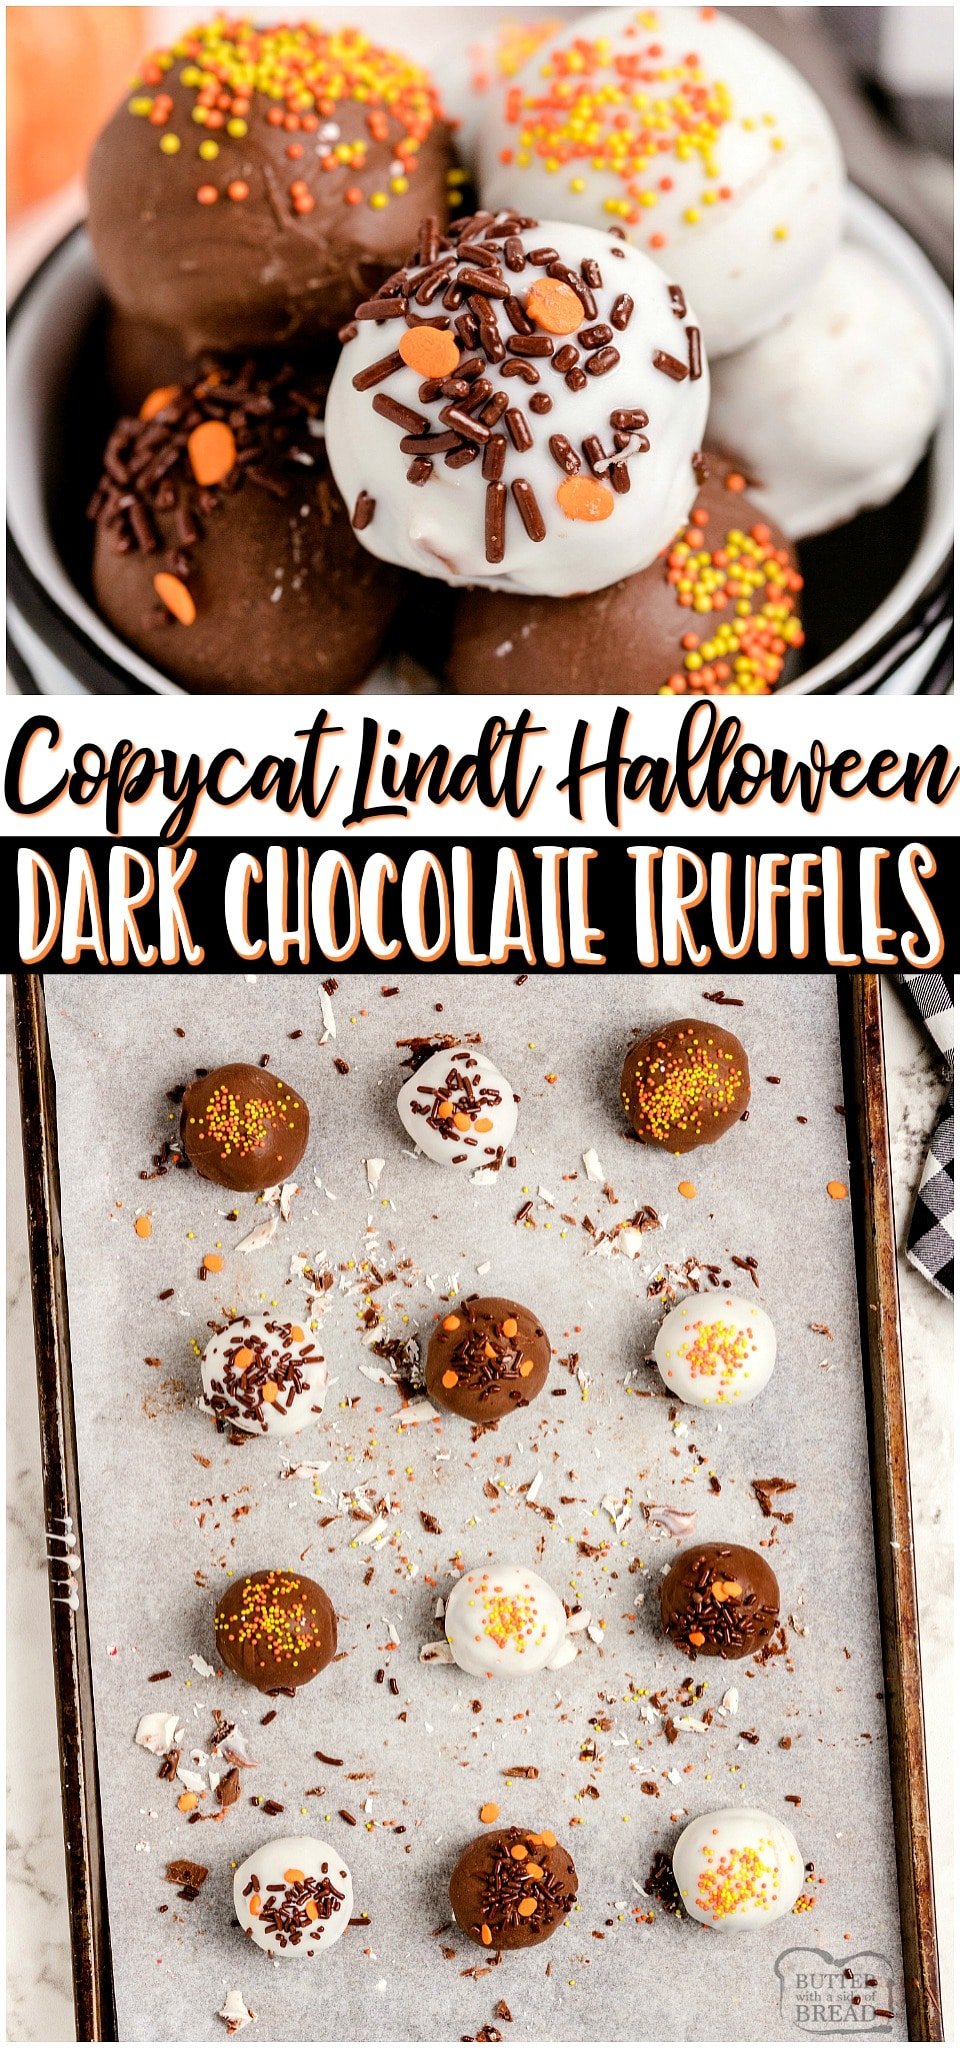 Homemade Halloween Lindt Dark Chocolate Truffles made with just 5 ingredients and SO amazing! Chocolate chips, heavy cream and butter combine for a rich & smooth luscious chocolate truffle filling that rivals Lindt's! Chocolate lovers must try these festive Halloween Truffles! #Lindt #chocolate #truffles #candy #darkchocolate #Halloween #easyrecipe from BUTTER WITH A SIDE OF BREAD